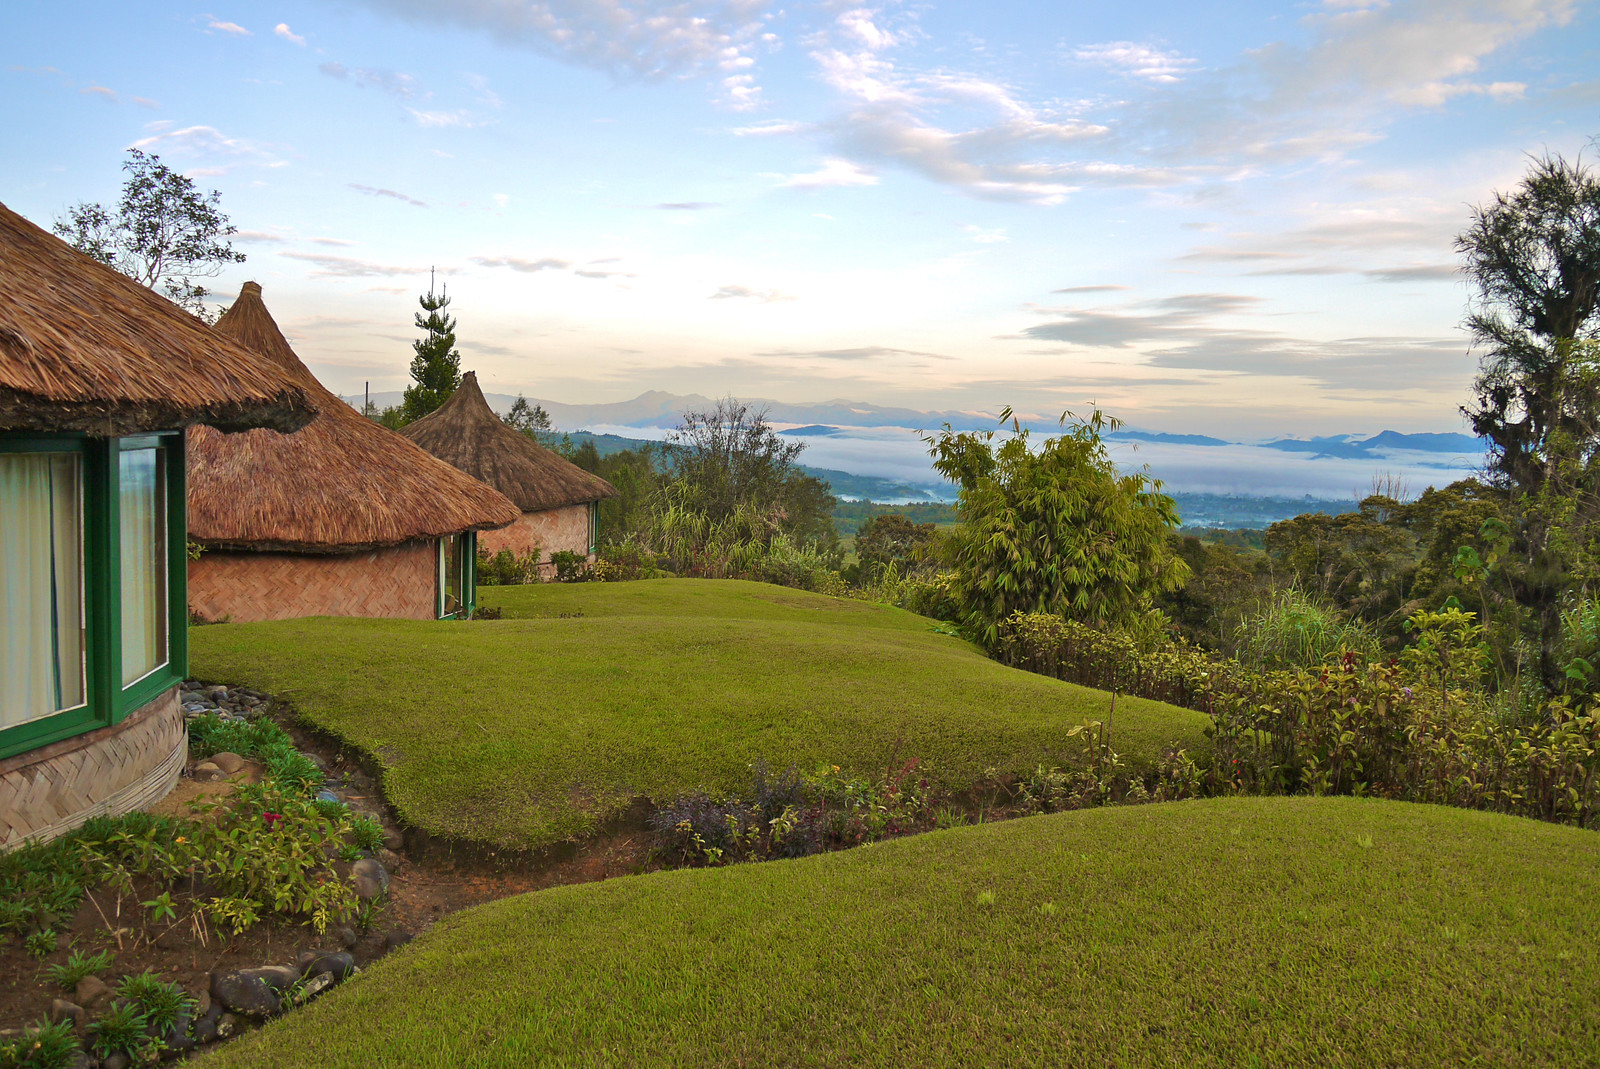 <p>Rondon Ridge is one of the best resorts in Papua New Guinea and its totally eco-friendly. Water at the resort is filtered on-site, and guests are given reusable water bottles when they arrive. </p>  <p><strong>Electric vehicles </strong>are used for nature tours, which limits the amount of pollution they create.</p>